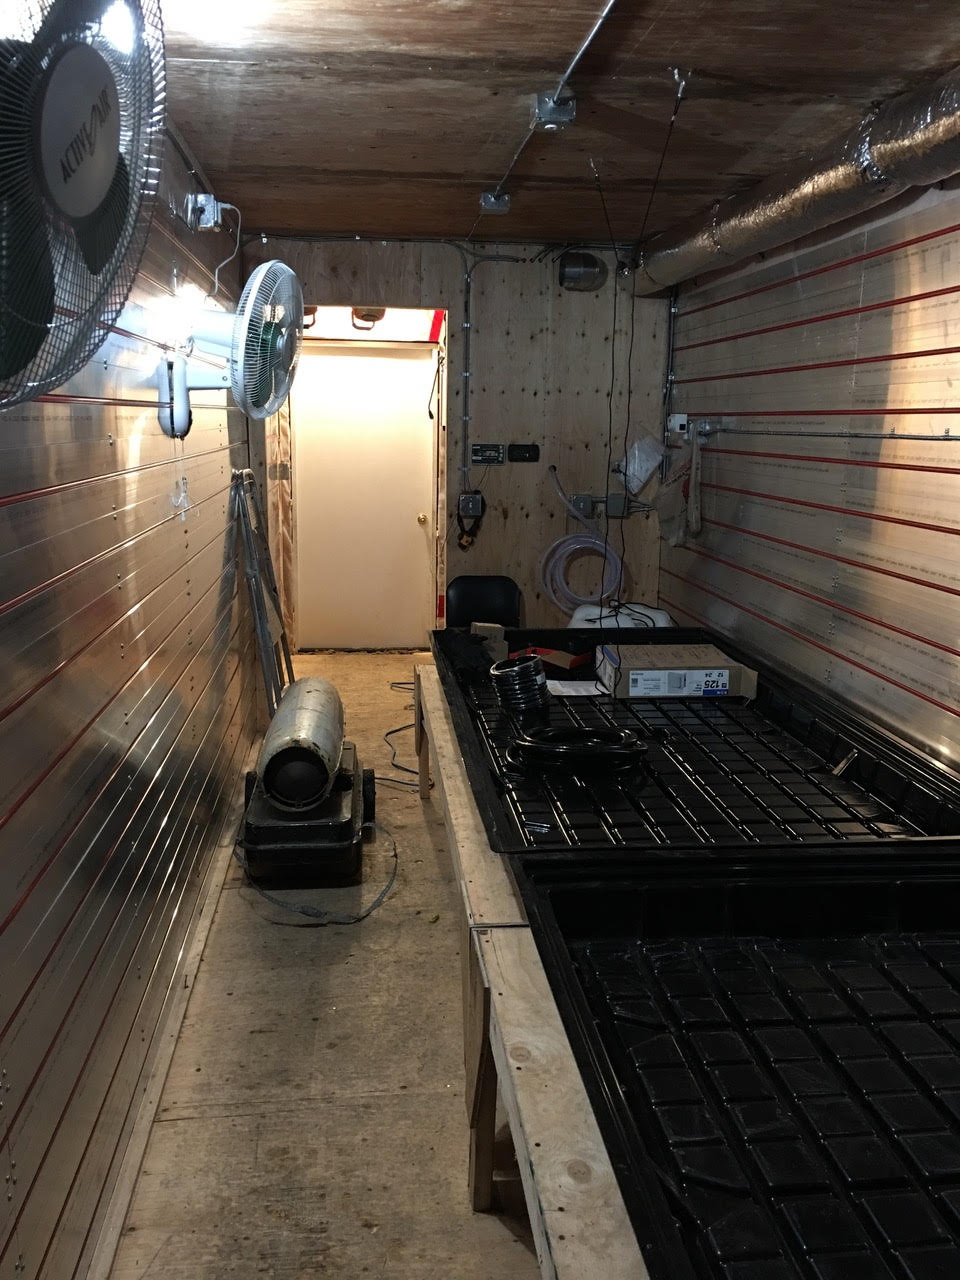 This hydroponic growing area allows the village to grow produce nearly nine months out of the year, despite external temperatures as low as 40 degrees below zero.